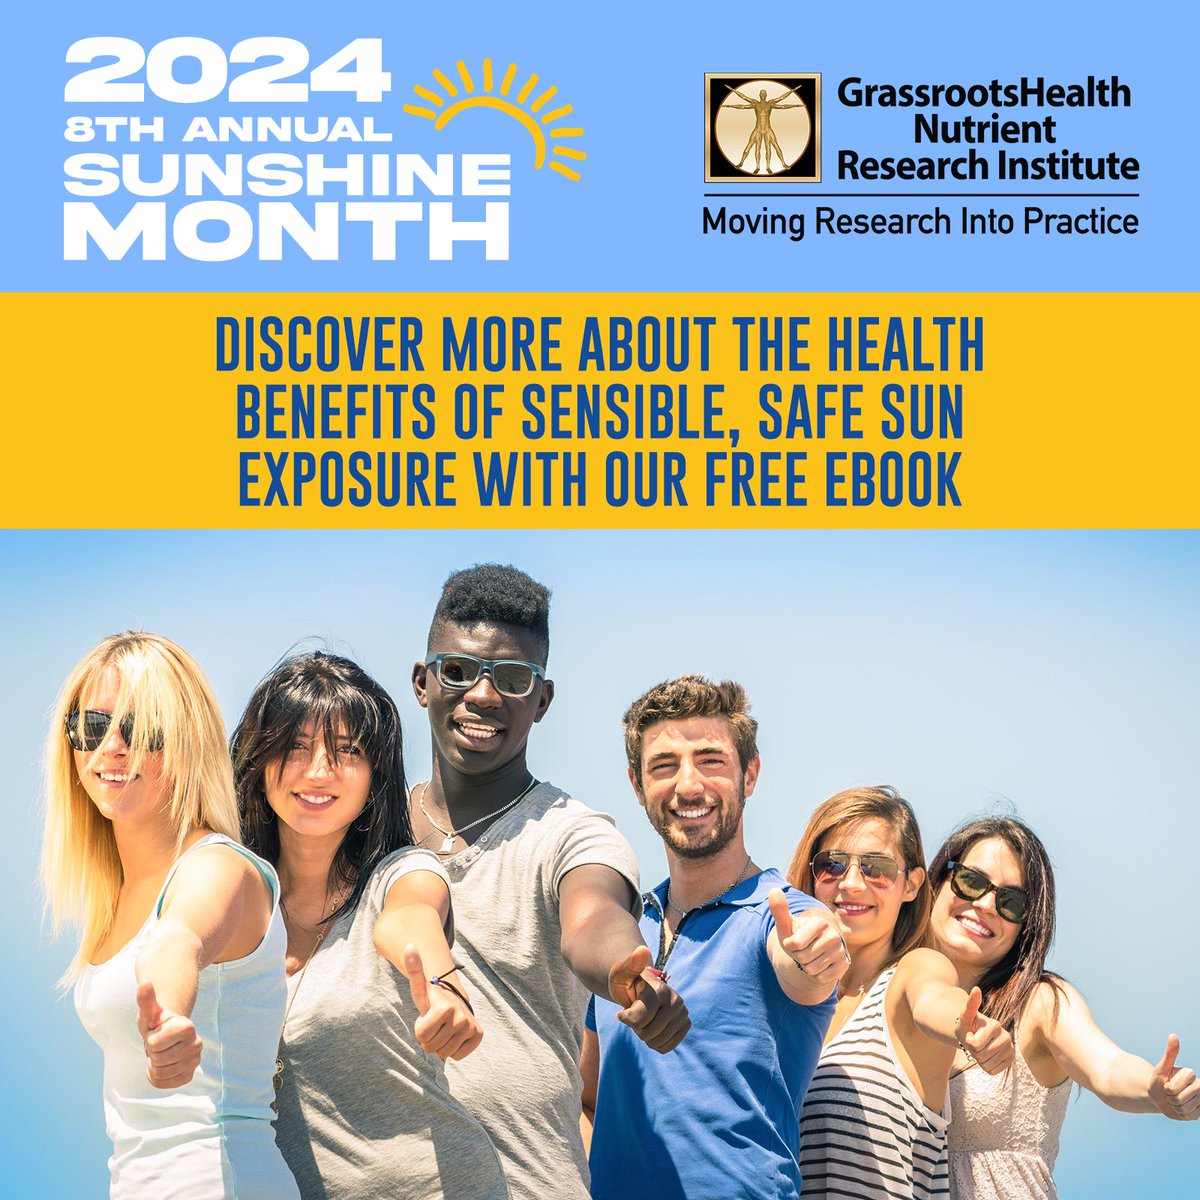 New guidelines for sun exposure are tailored for specific groups based on skin type, risk of skin cancer, and vitamin D deficiency. Increased sun exposure is now recommended for darker-skinned individuals. buff.ly/44l1j2r #SunshineMonth #Sunshine #VitaminD